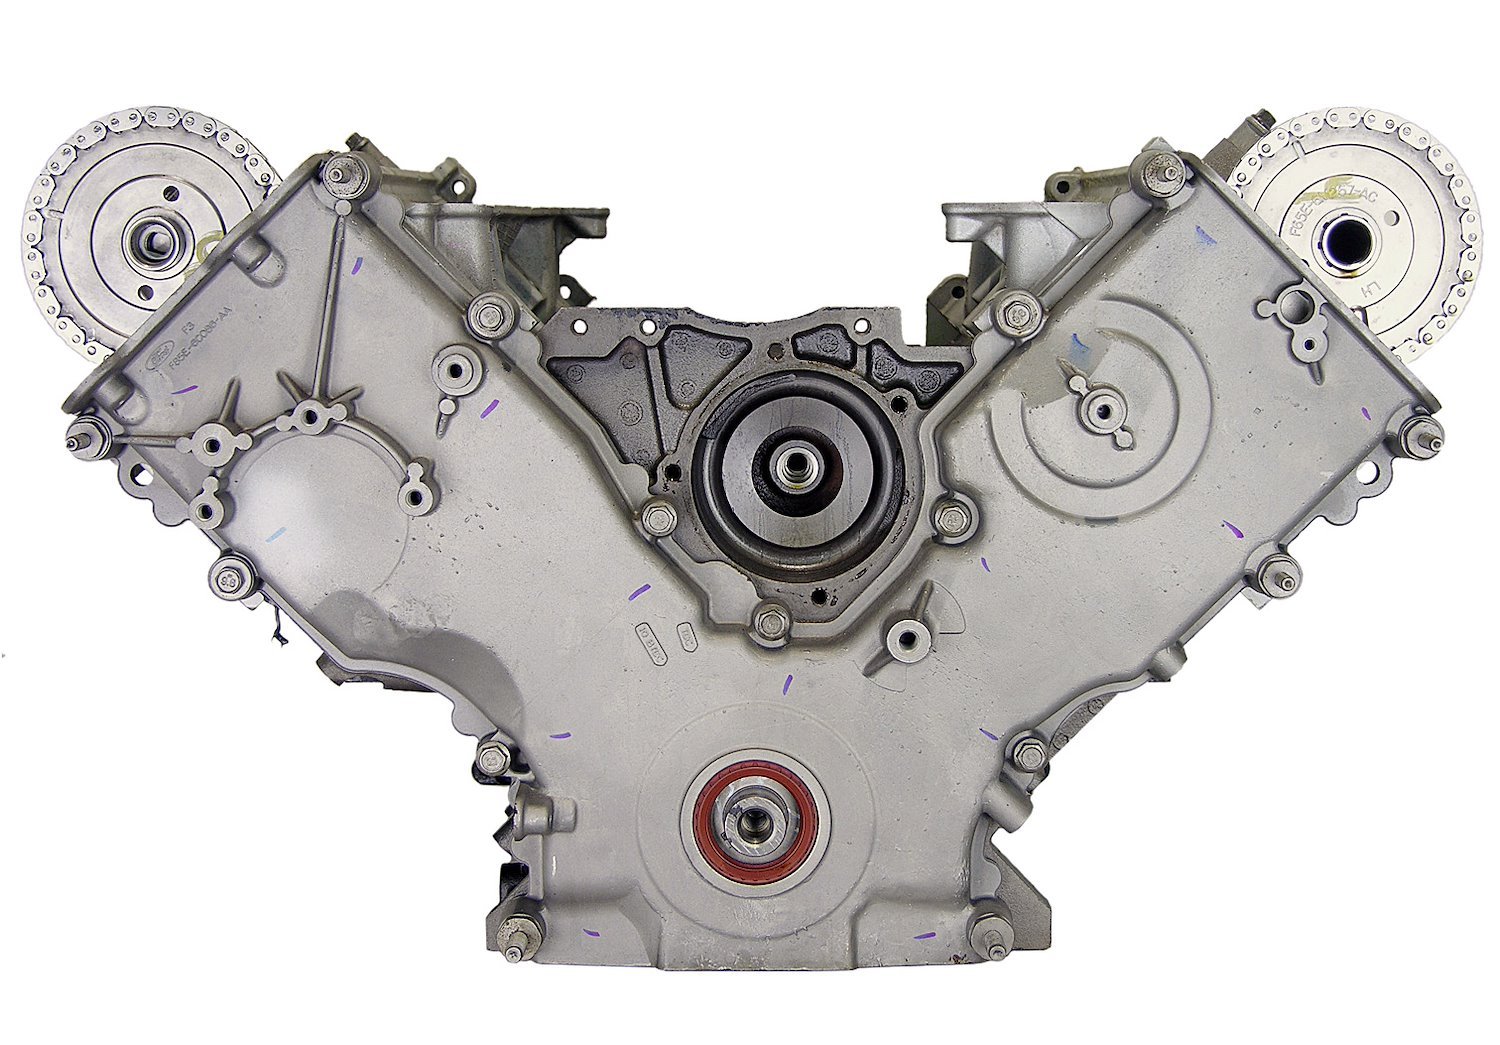 Remanufactured Crate Engine for 1999-2001 Ford F-Series Truck, E-Series Van, & SUV with 5.4L V8